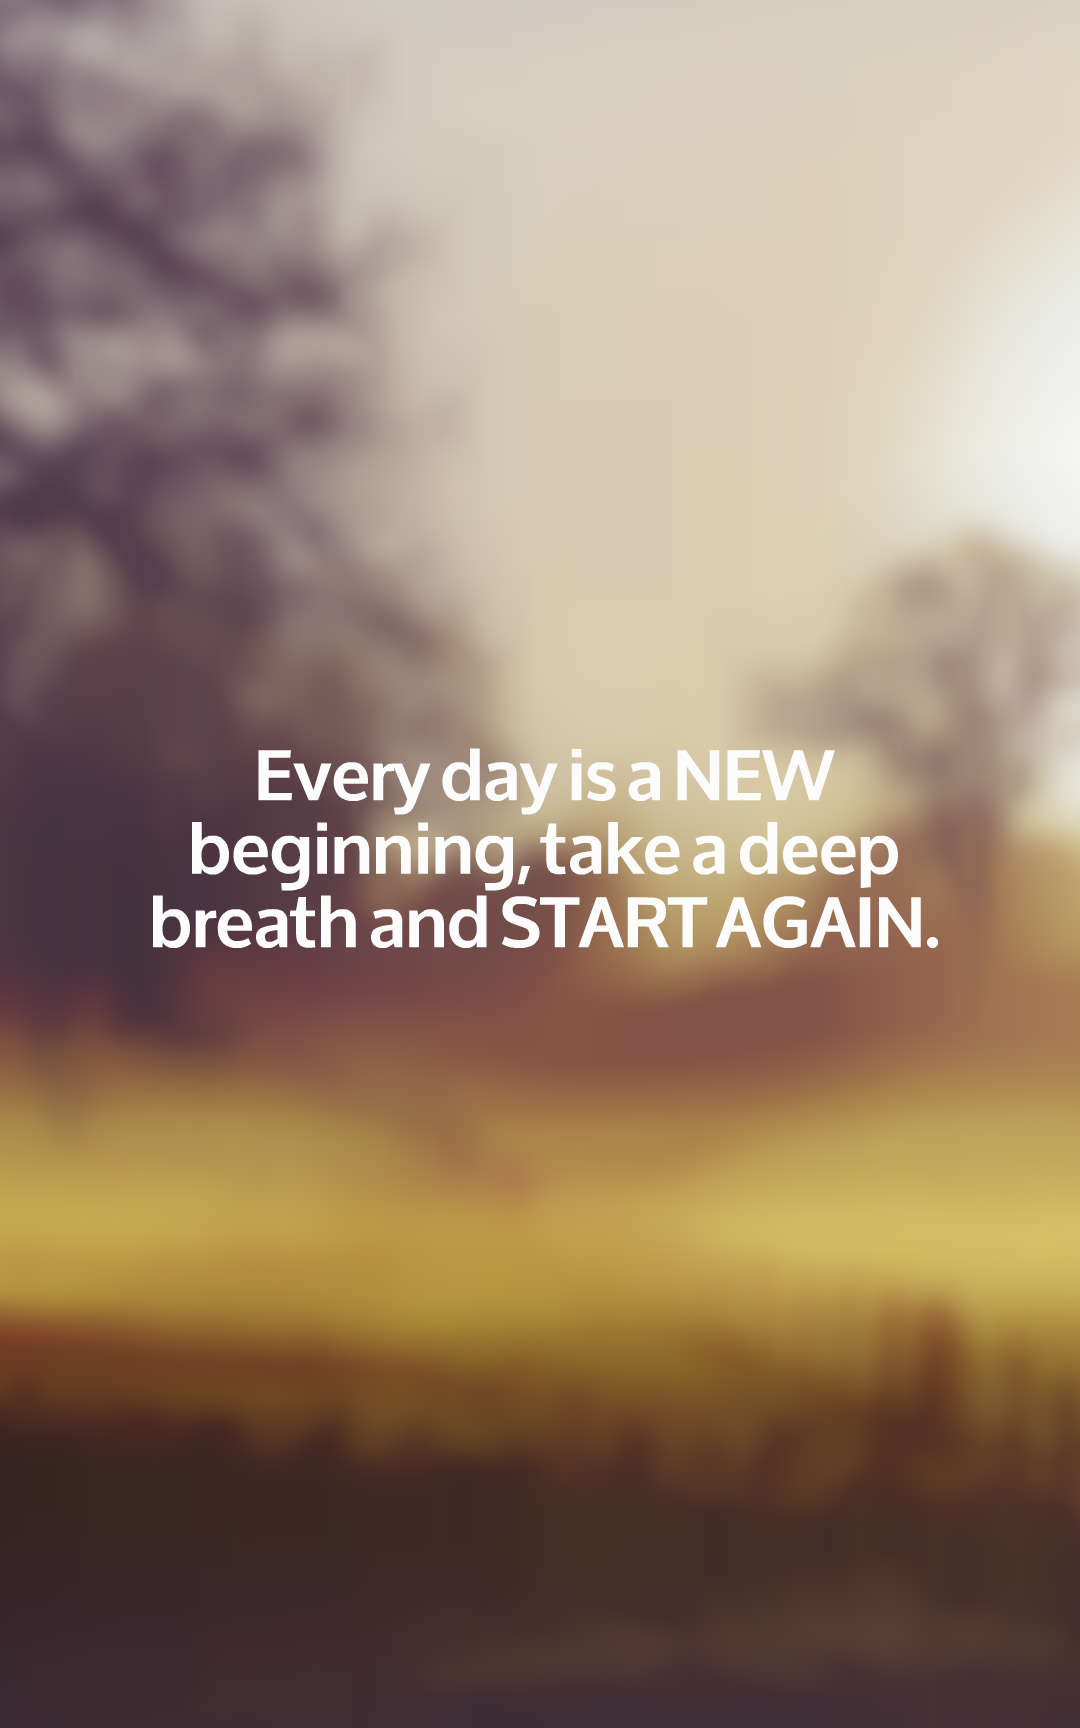 Every day is a NEW beginning, take a deep breath and START AGAIN.